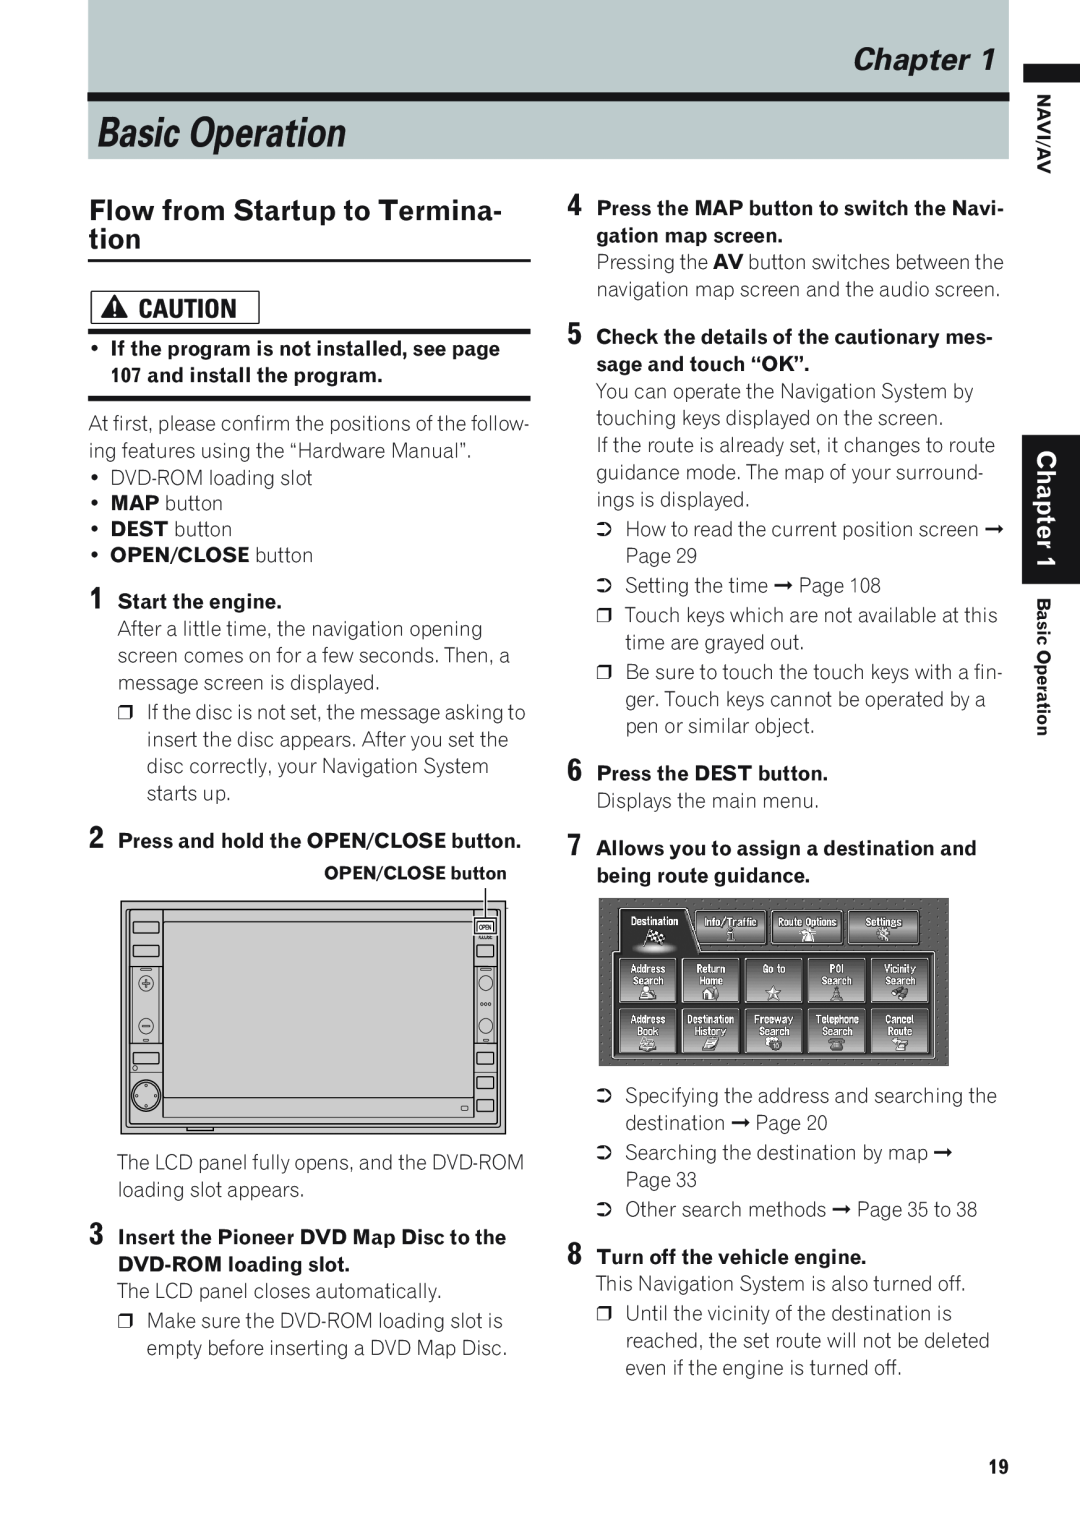 Pioneer AVIC-D1 operation manual Basic Operation, Chapter, Flow from Startup to Termina- tion 